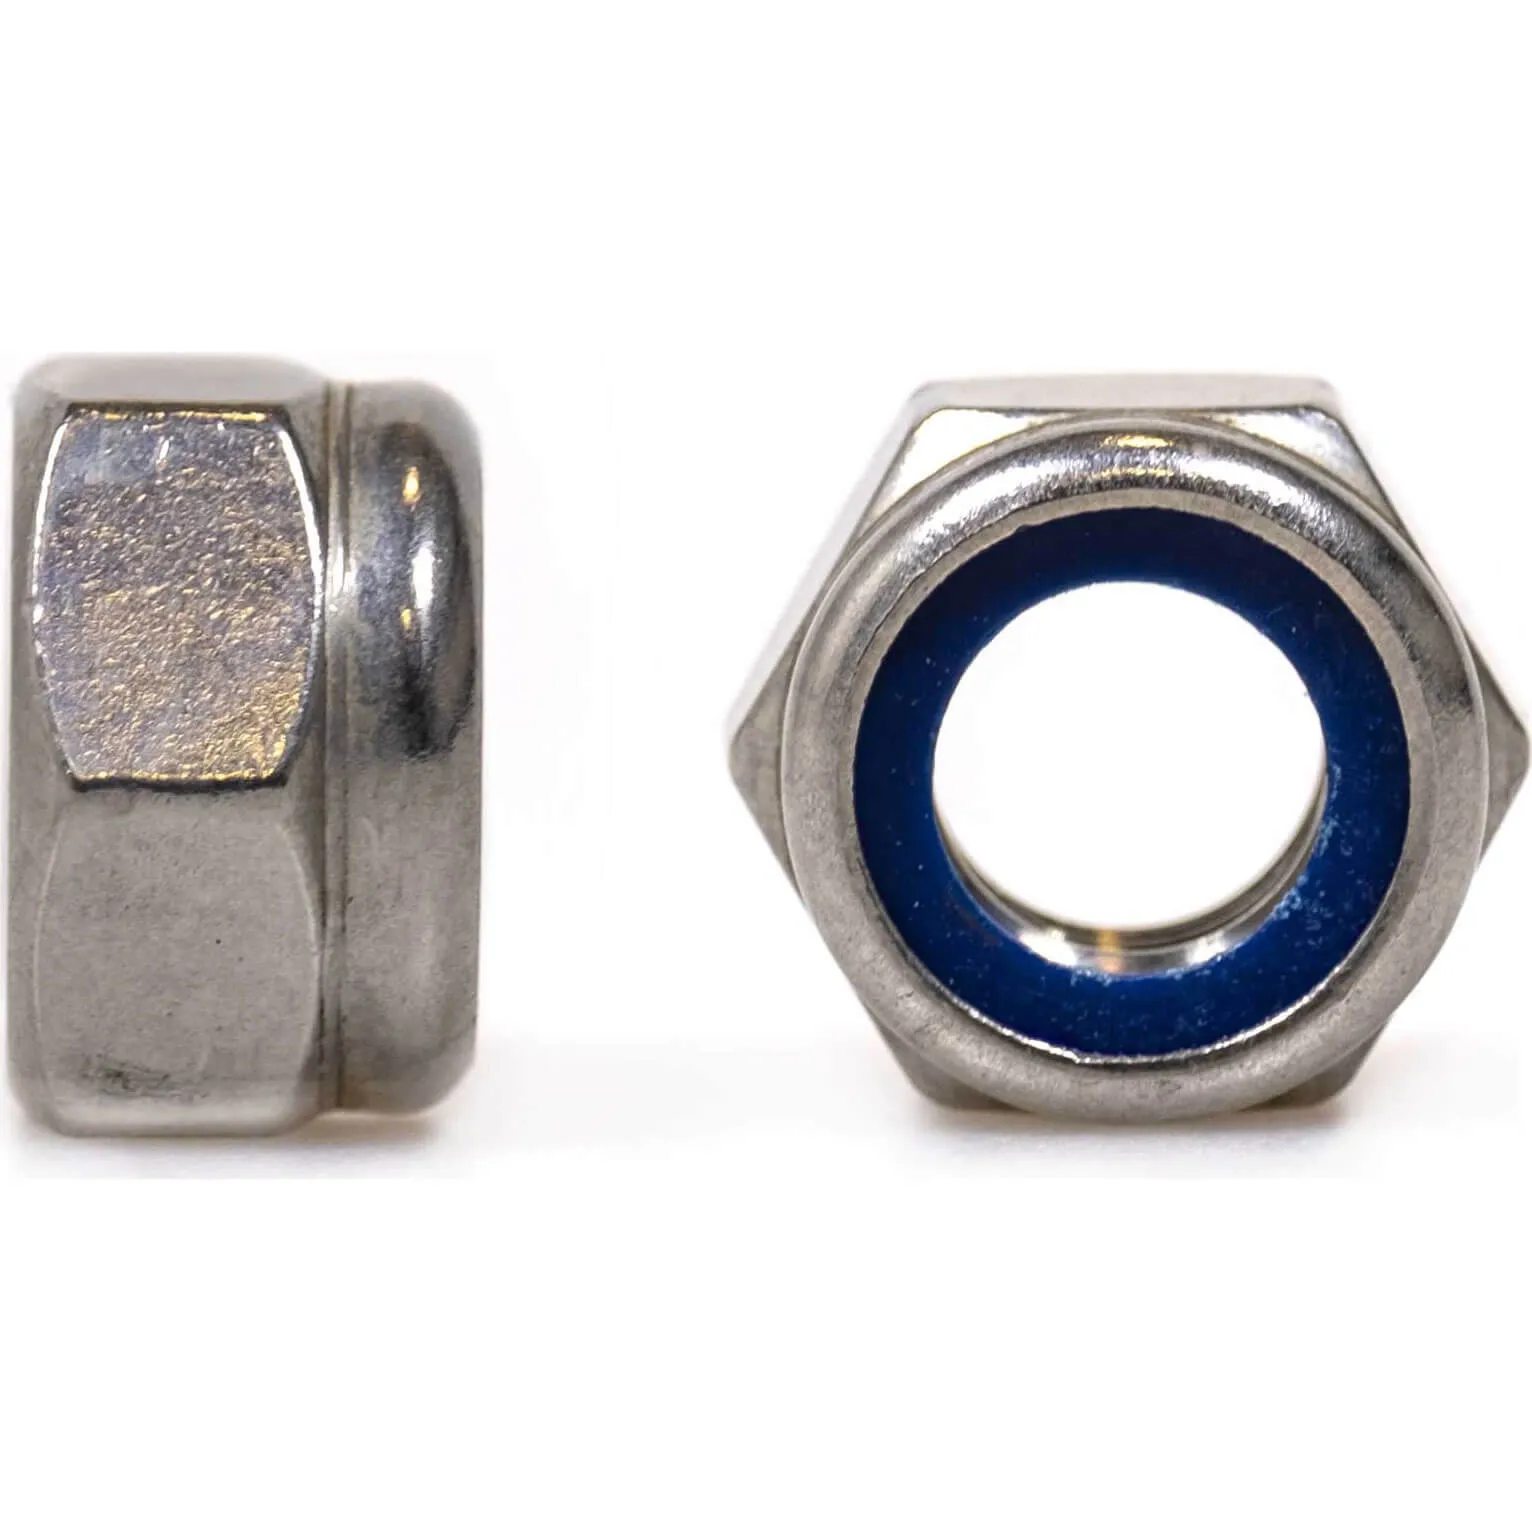 Sirius A2 304 Stainless Steel Hexagon Lock Nuts - M4